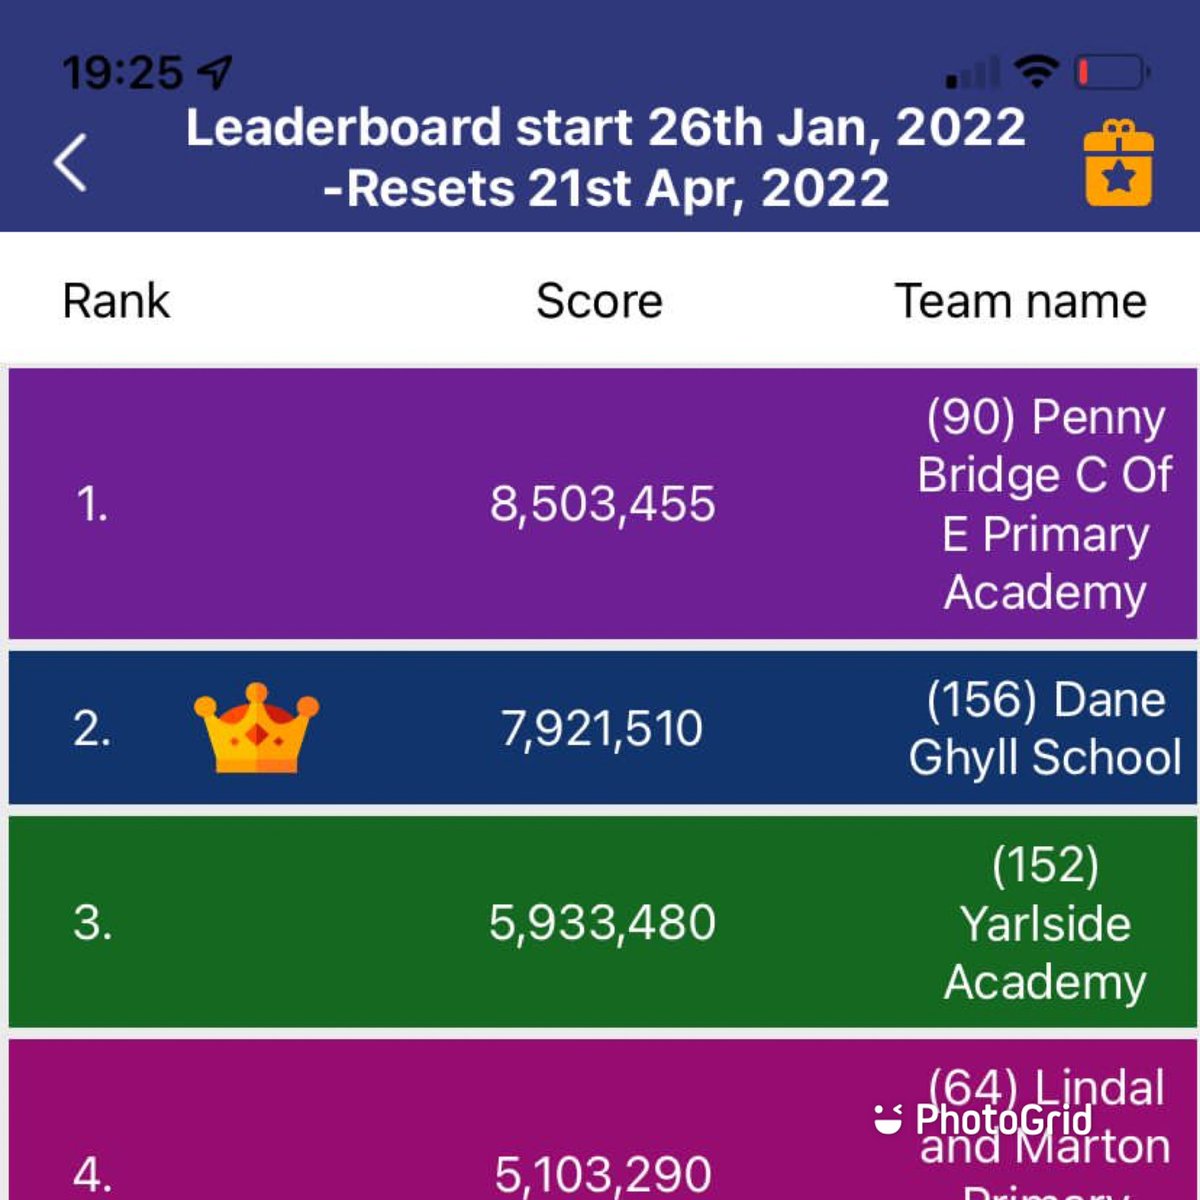 With less than two weeks to go, can we make it to the top? We are so close! The top five on our individual leader board have a chance of winning an Easter prize. The points will reset on the 21st April. Let’s see what we can do!